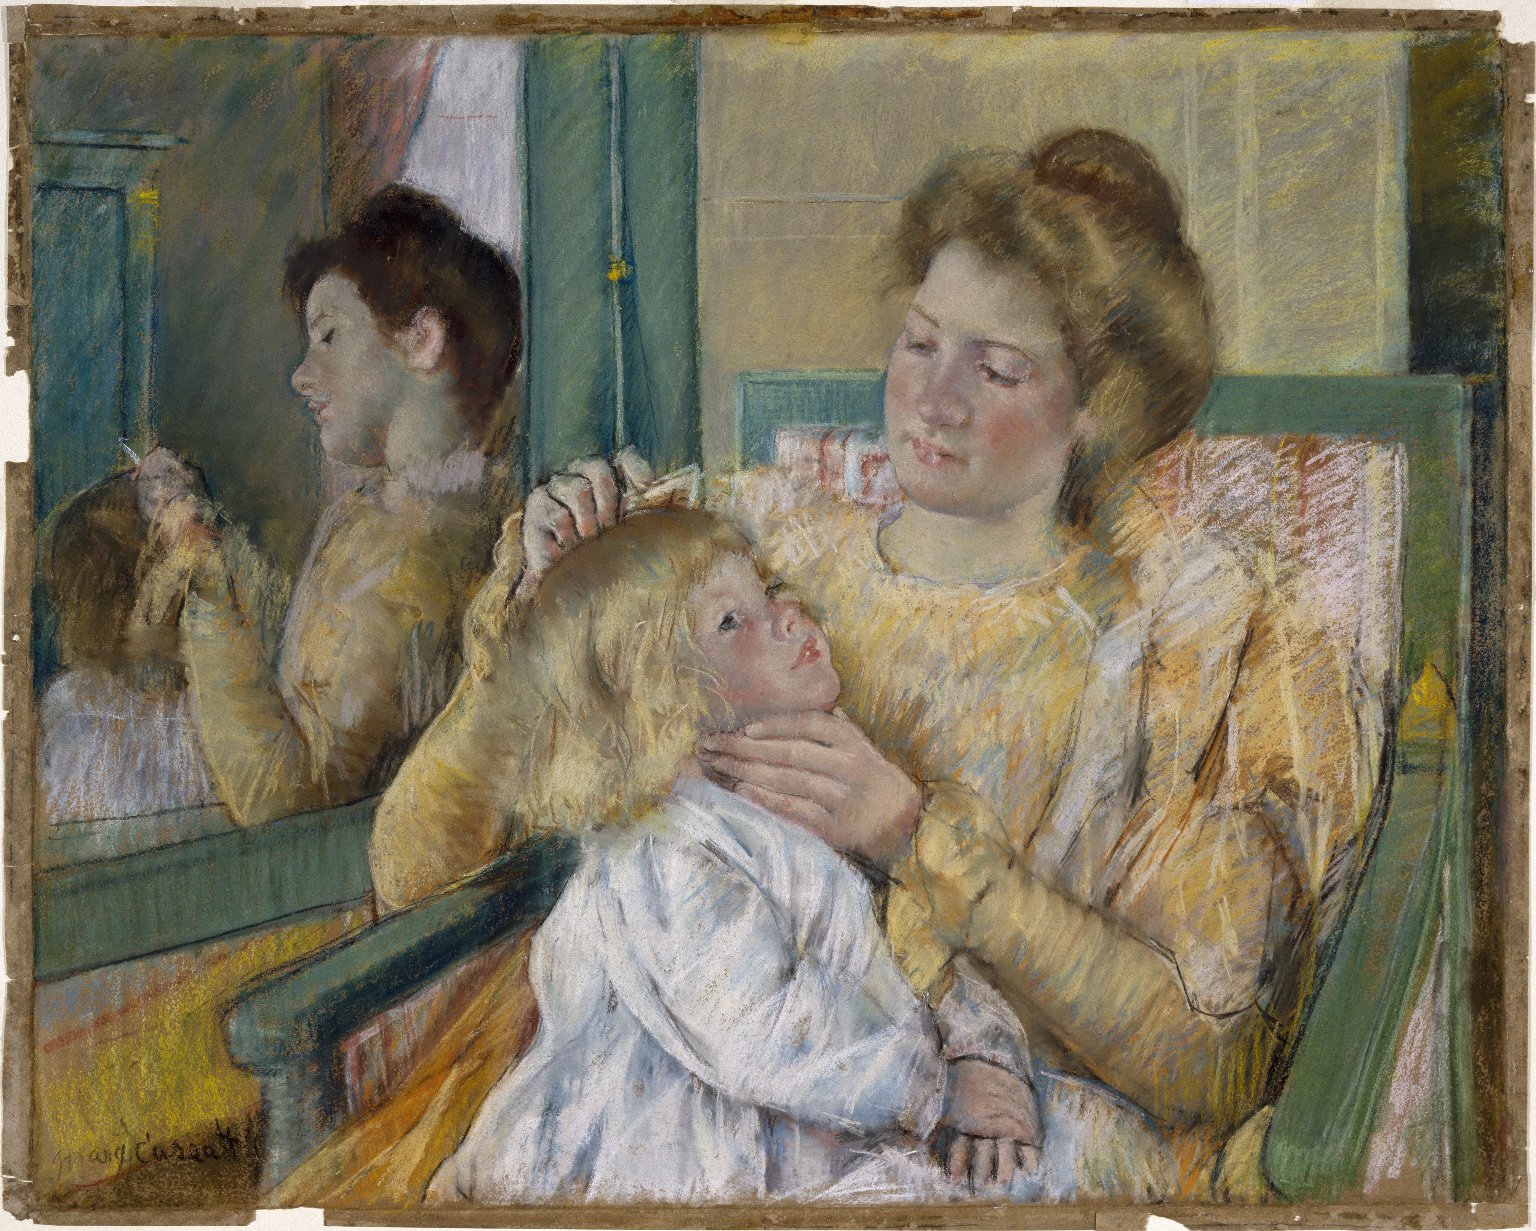 Mother Combing Her Child's Hair by Mary Cassatt - 1901 - 64.1 x 80.3 cm Brooklyn Museum